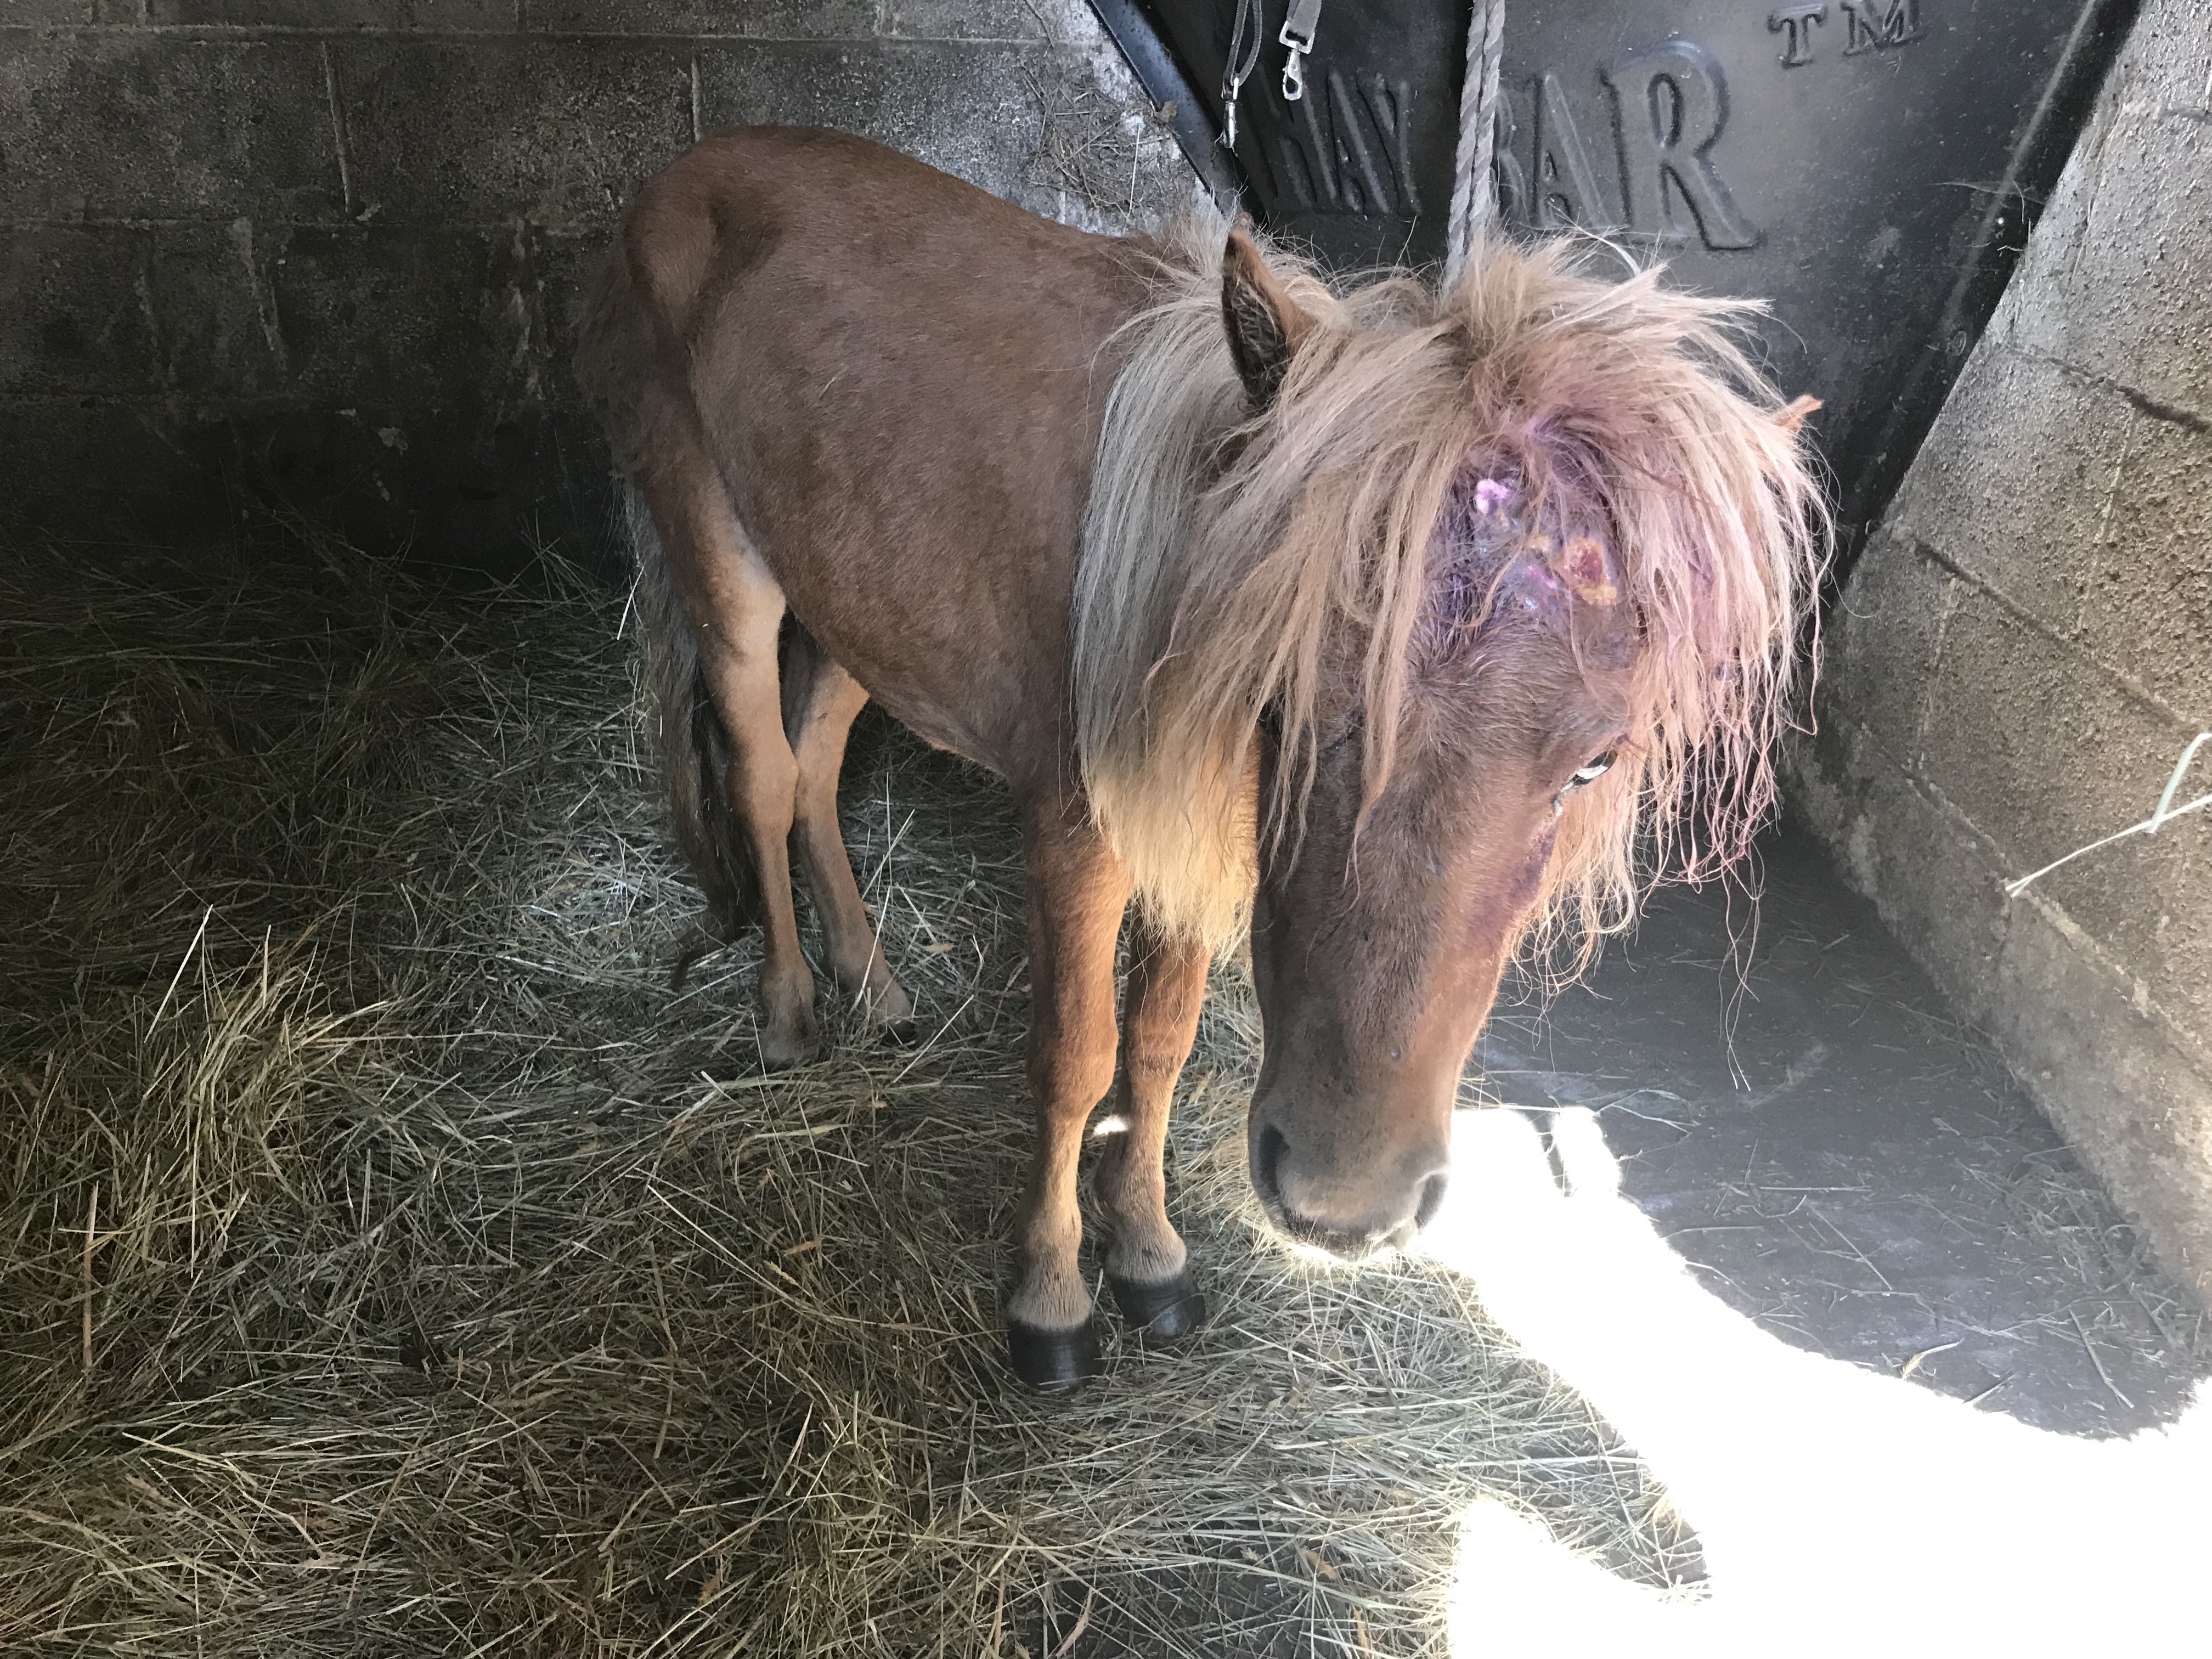 Emaciated and wounded pony found abandoned on busy road